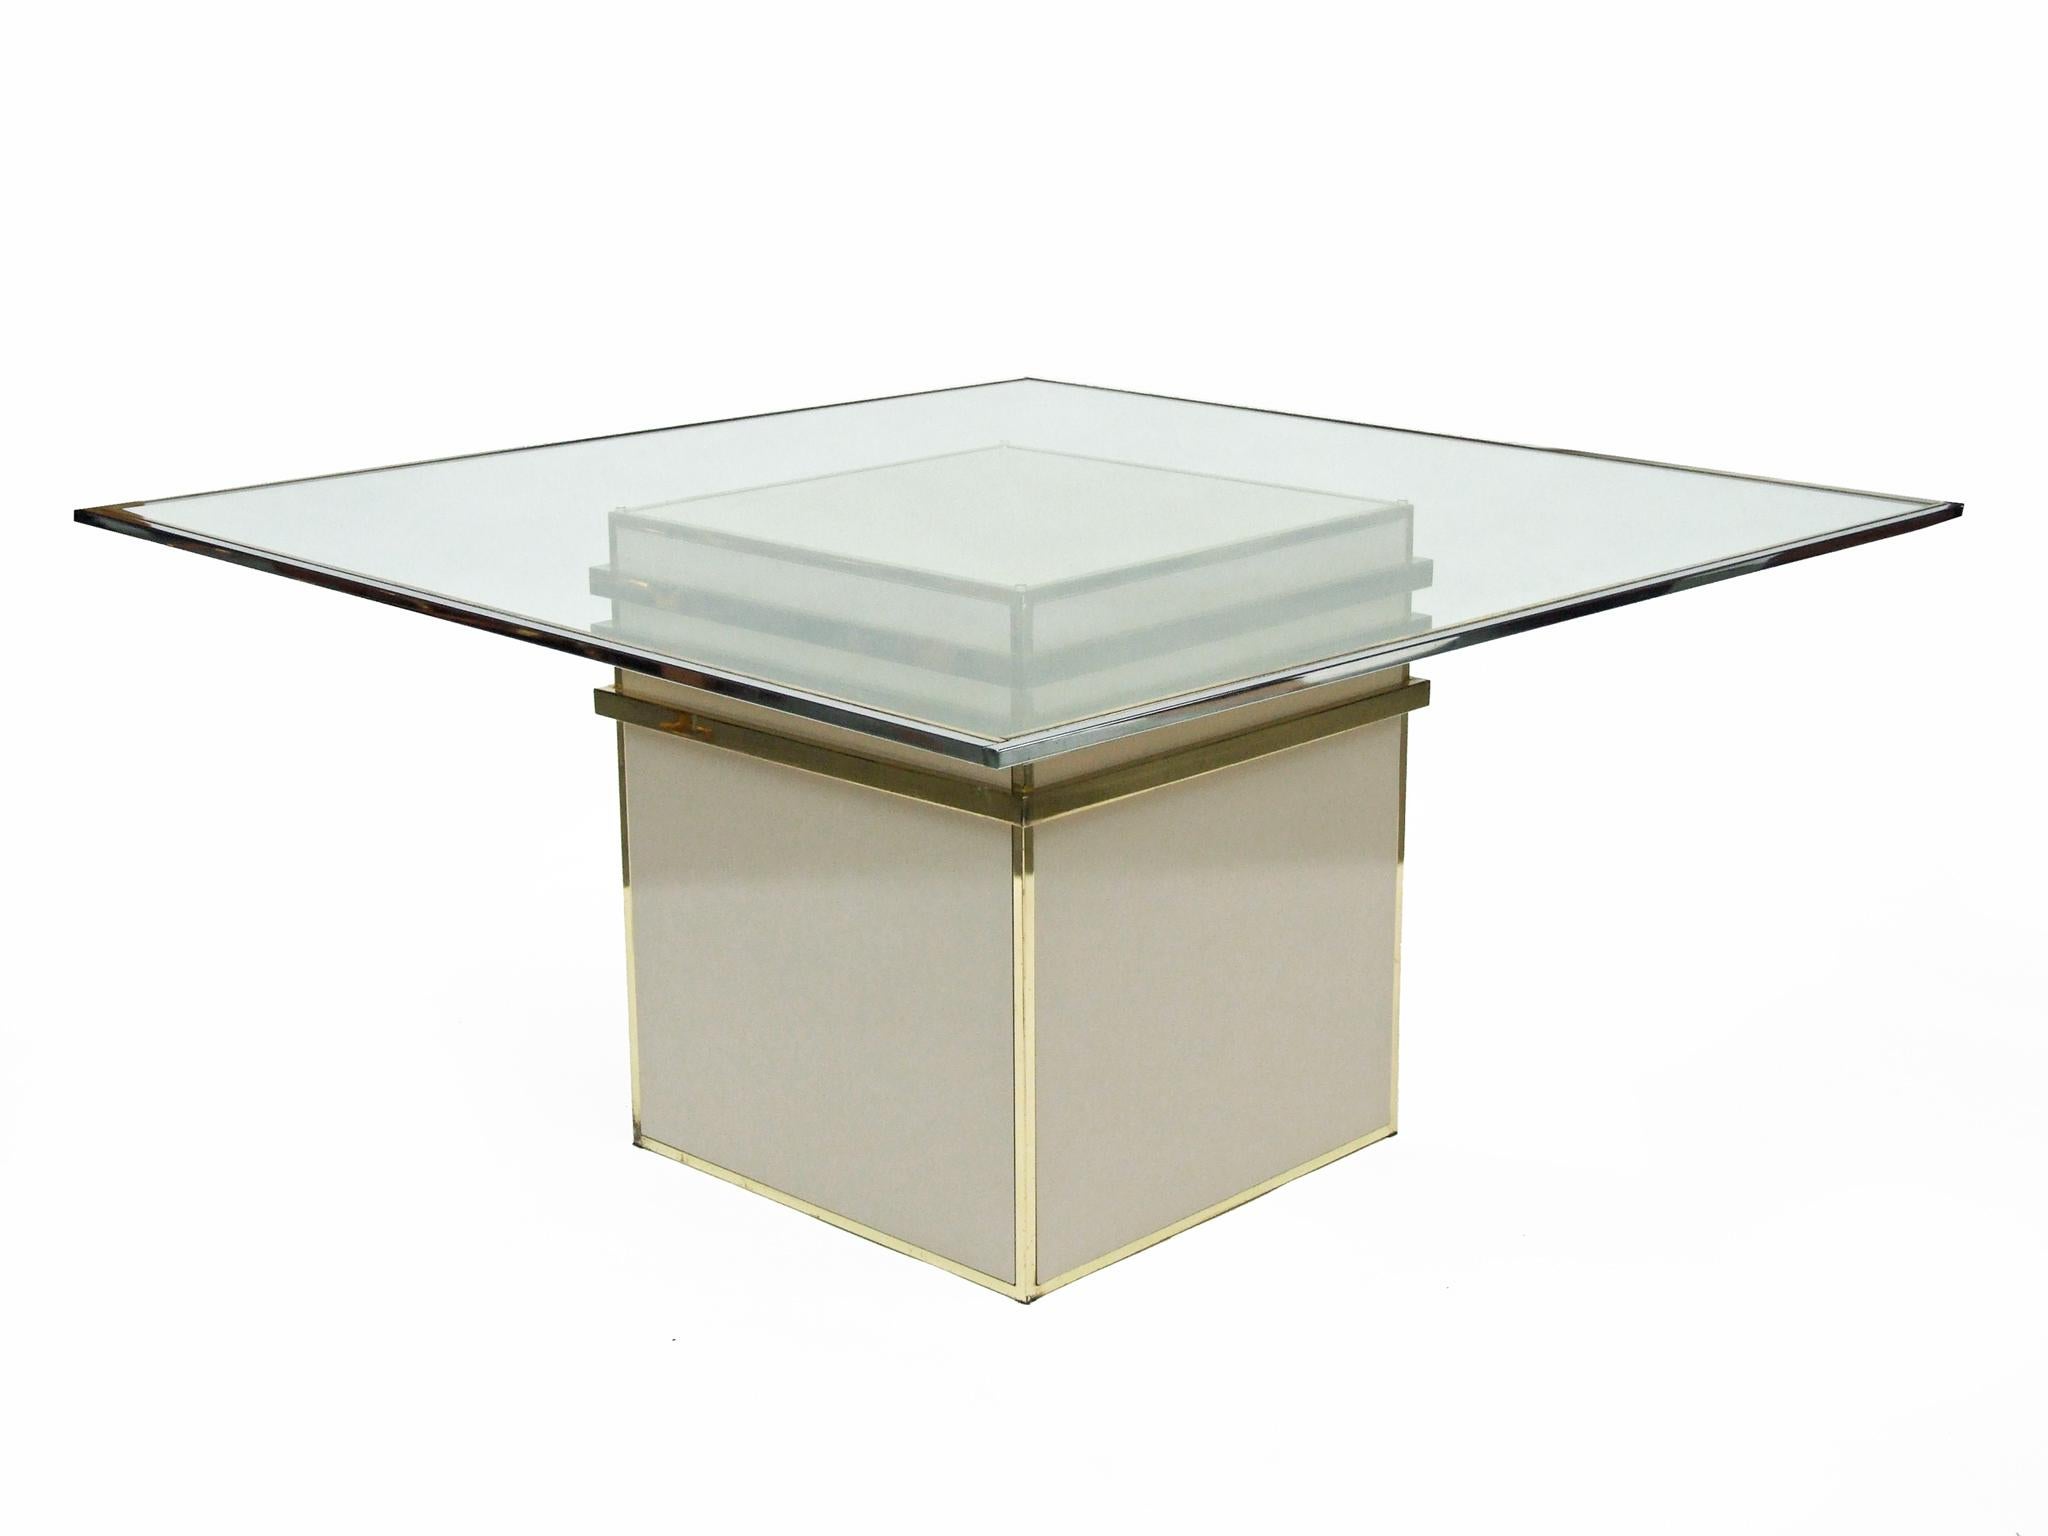 1970s reception dining table designed by Renato Zevi, Italy.
Cream laminate base with a brass plate design.
Large square clear glass top with a chrome and brass plate metal frame.

The table does have light pitting to the metal, but this is